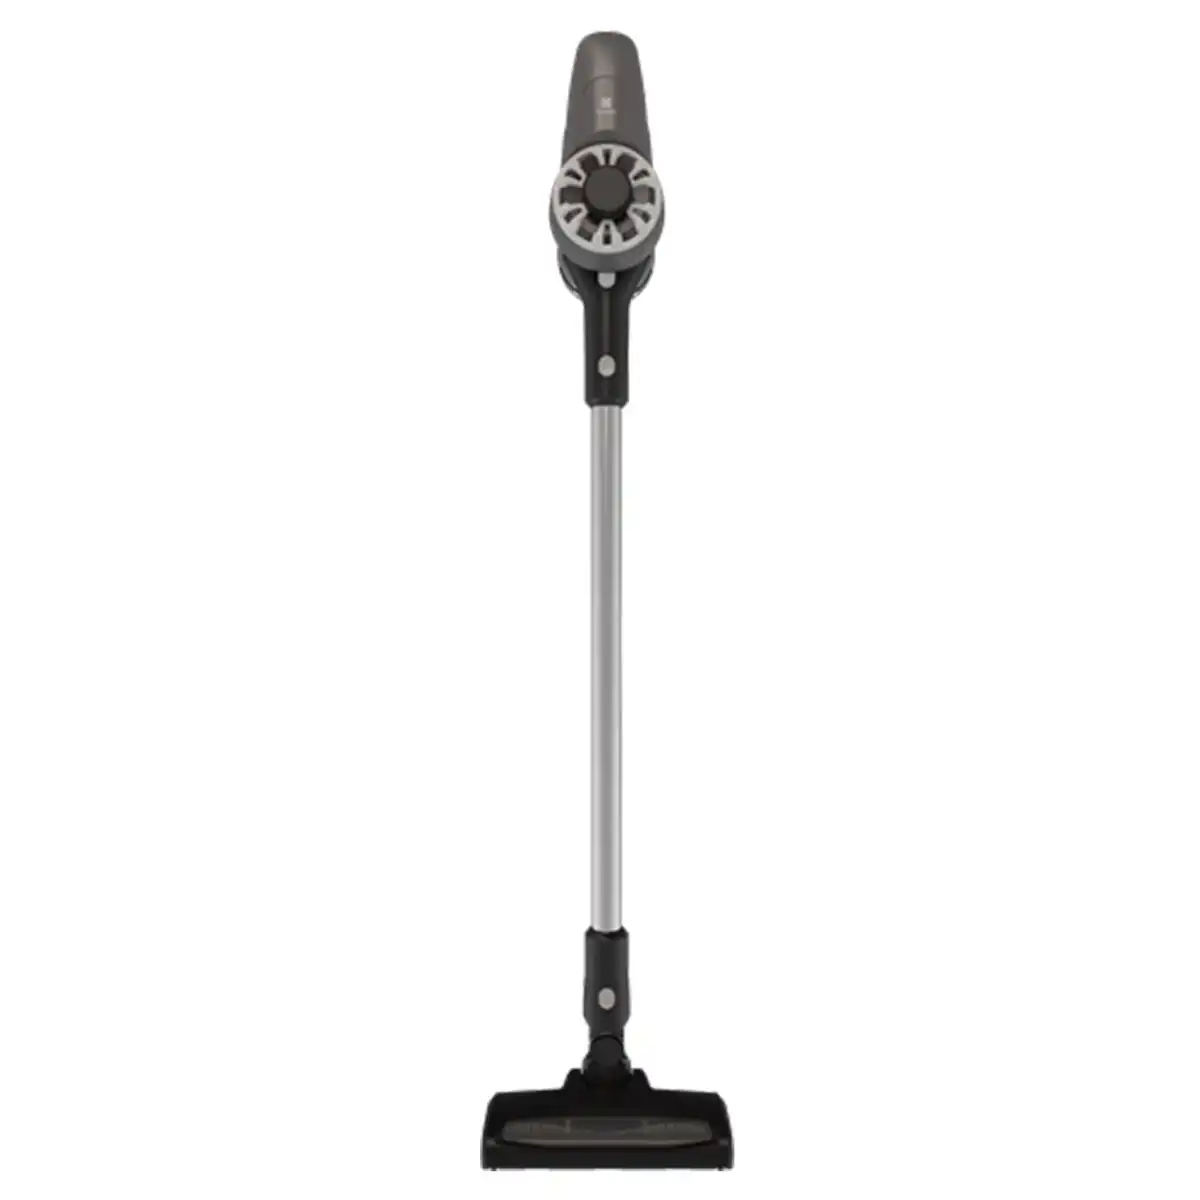 Electrolux Ultimatehome 300 Stick Vacuum Cleaner